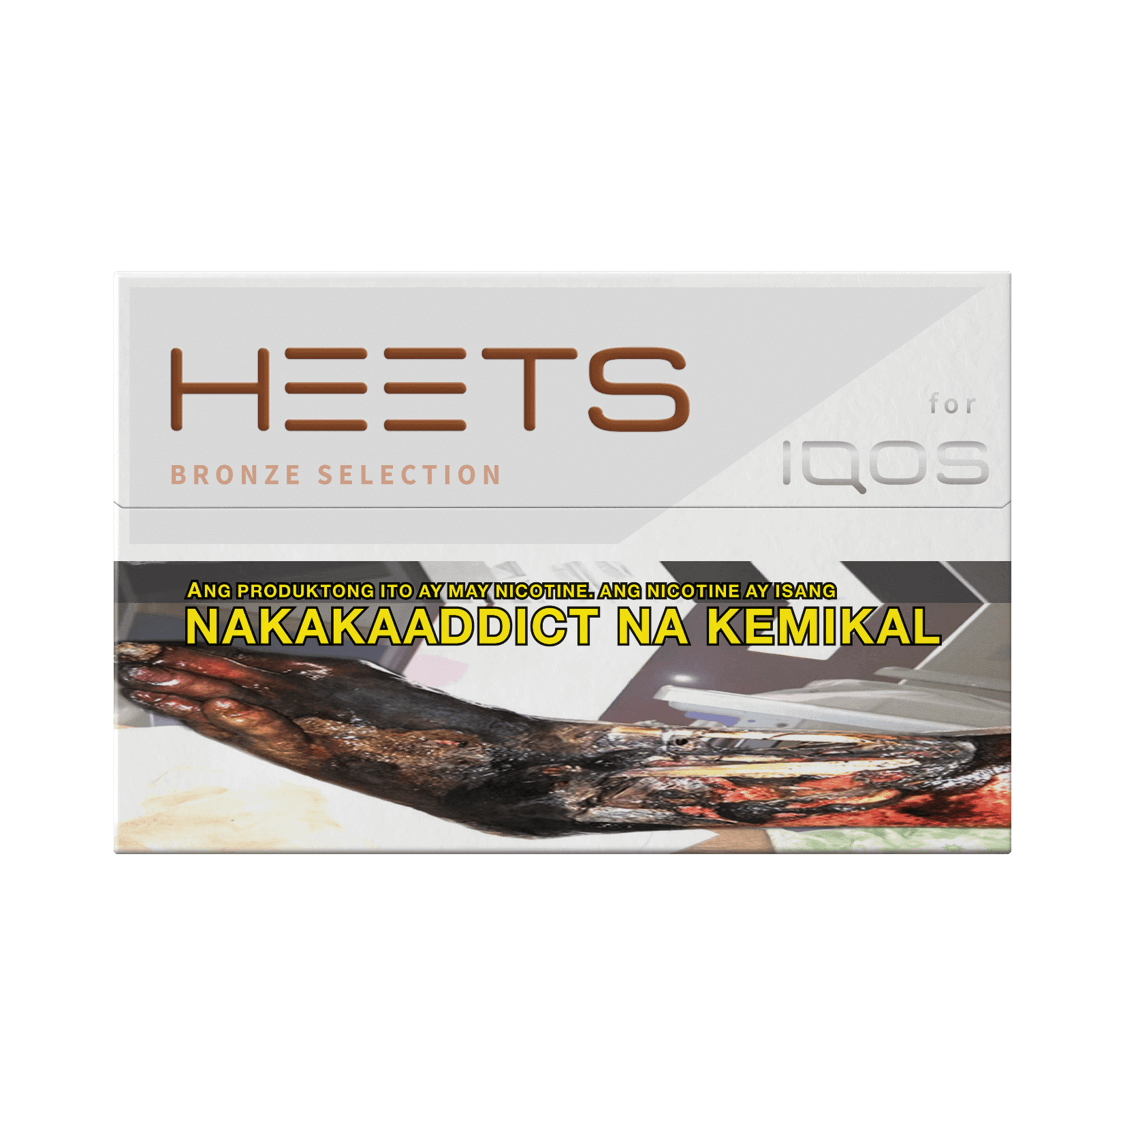 Heets Bronze Selection at ₱199.00